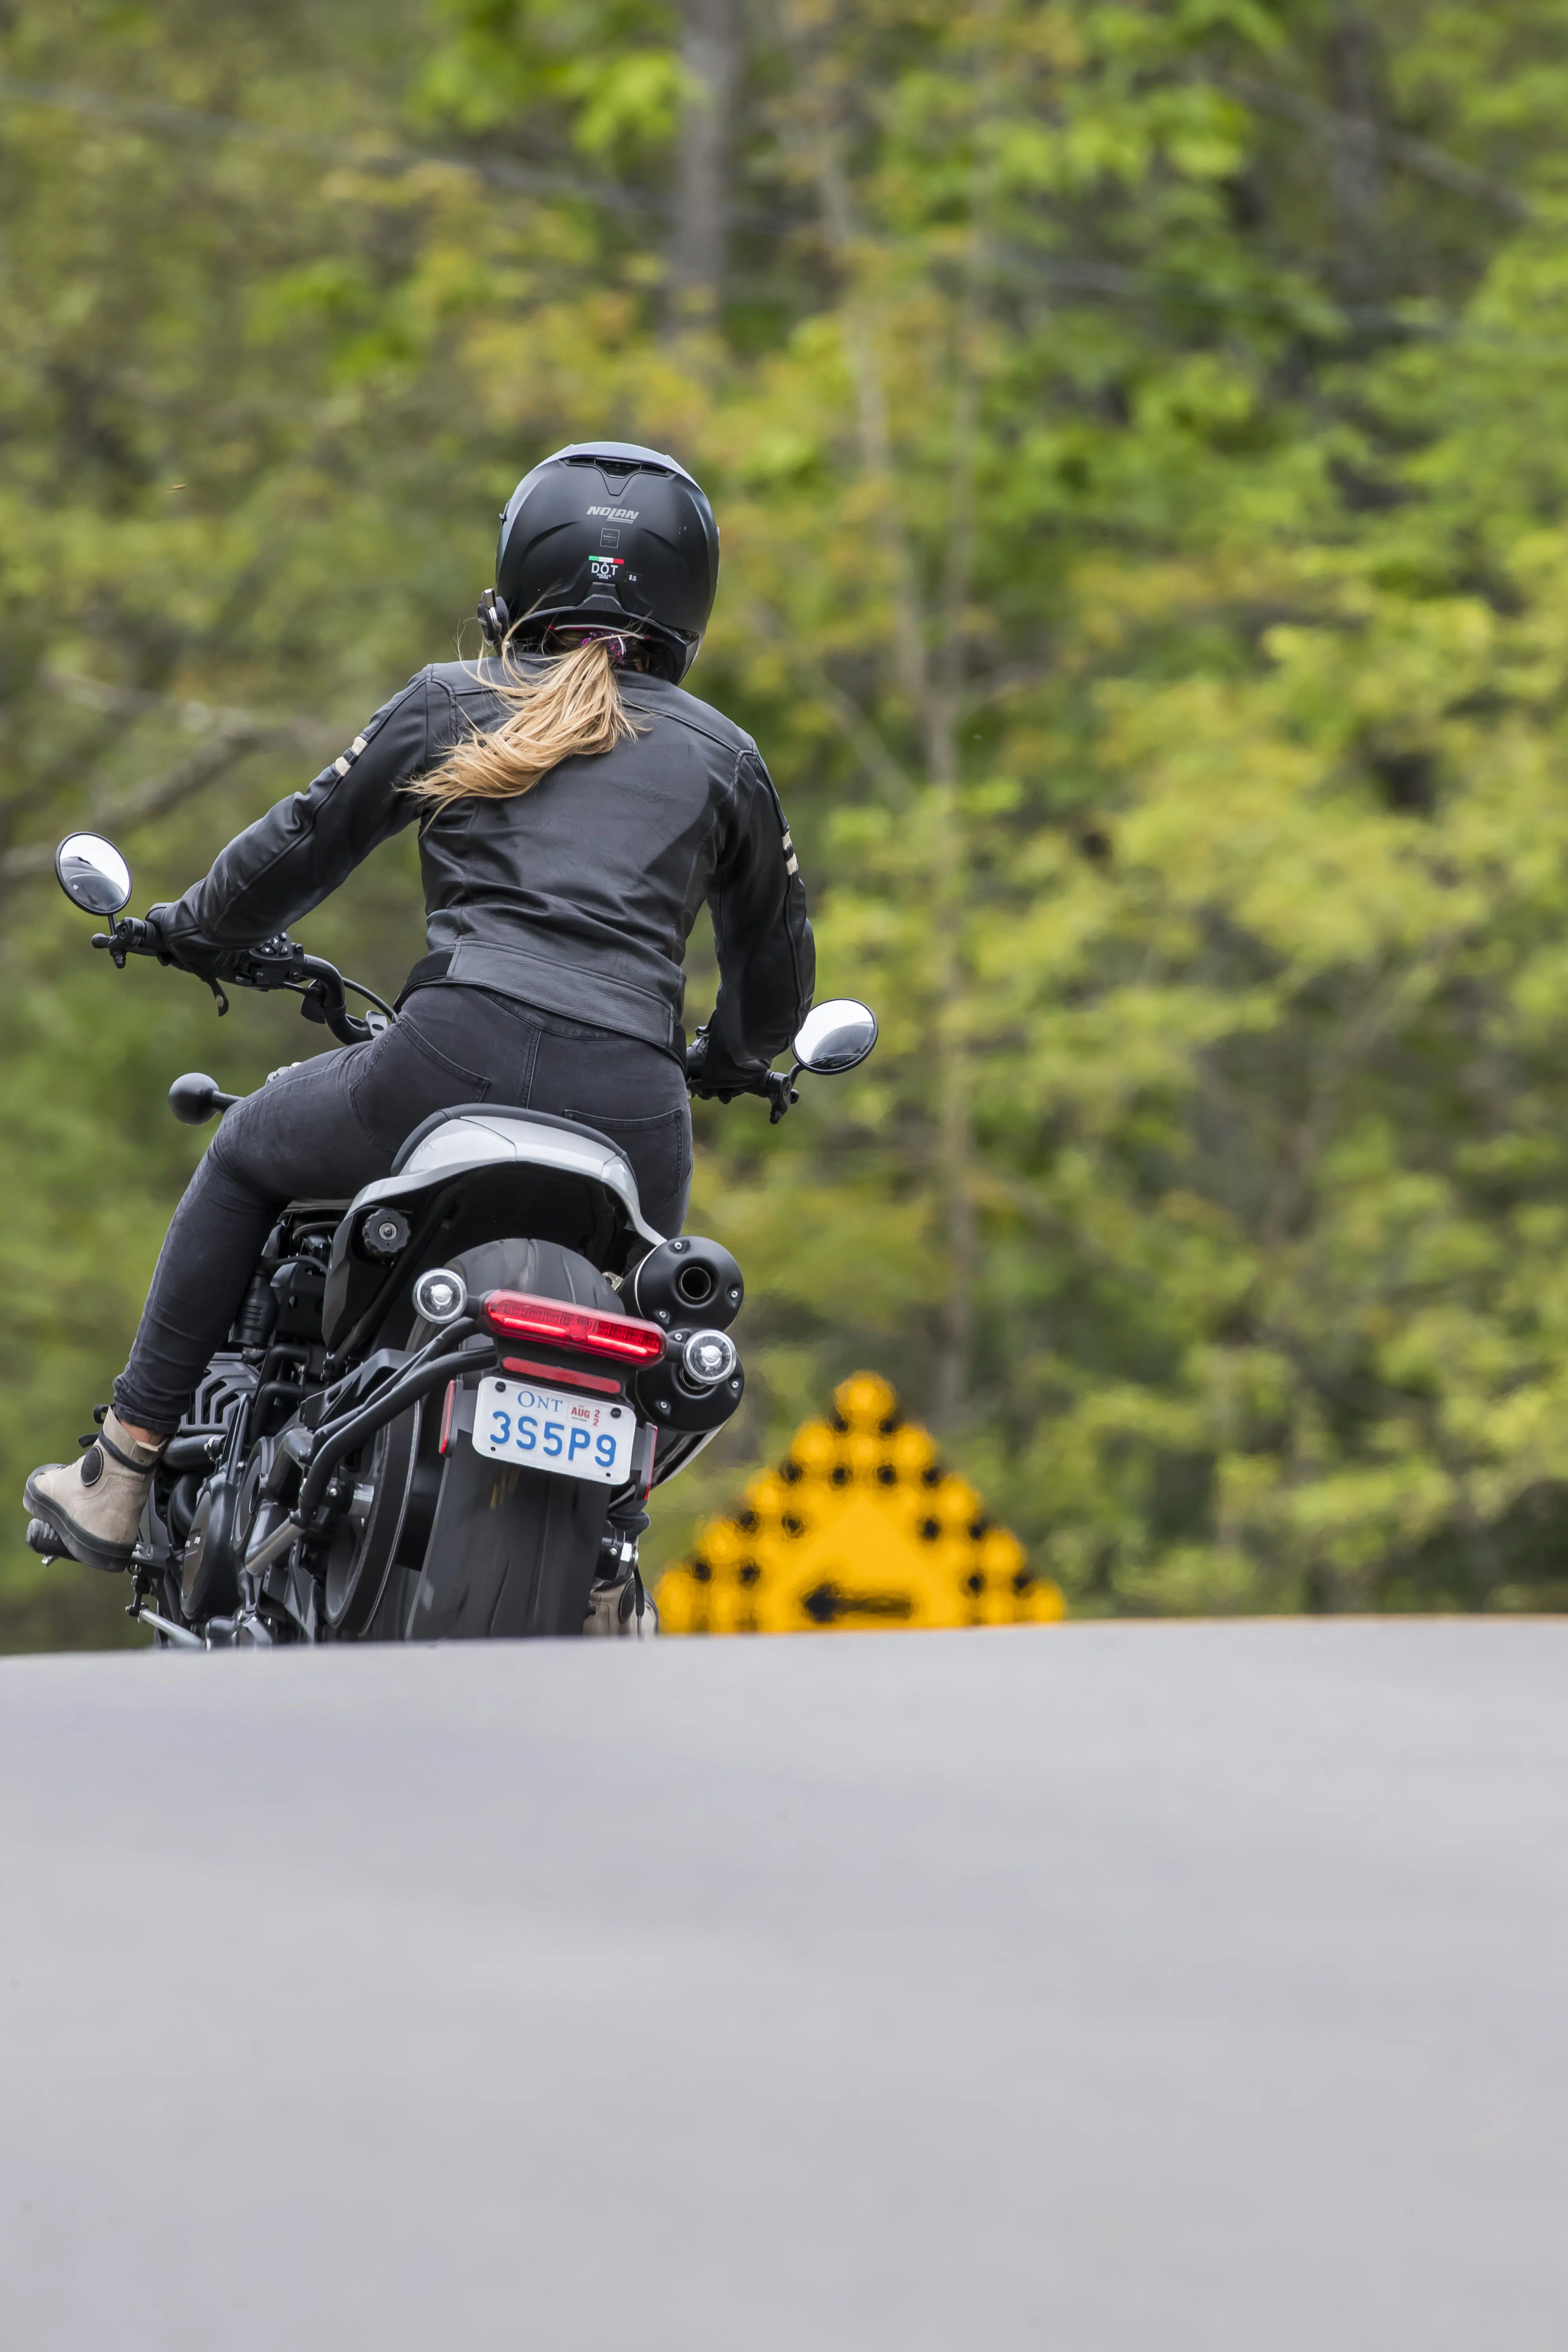 Get behind Cyndi on the 2021 Sportster S for a ride!